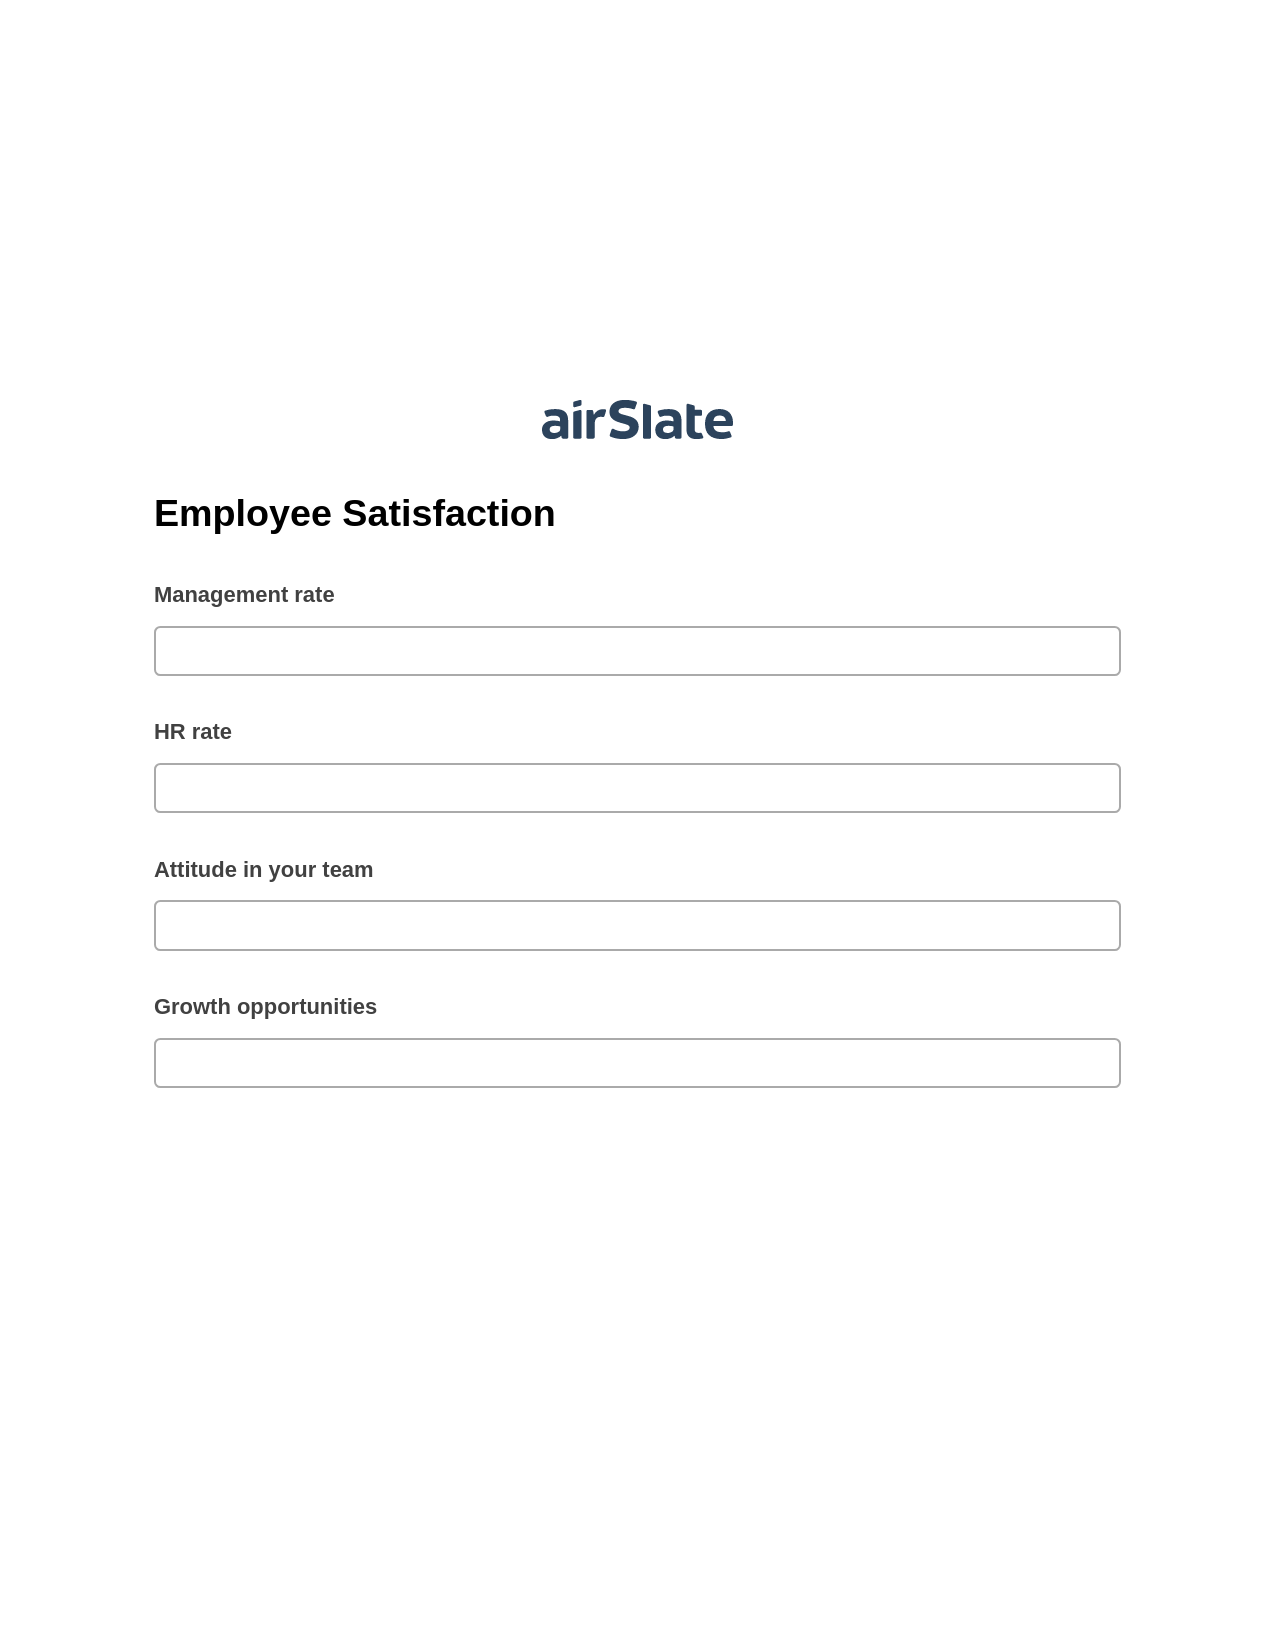 Employee Satisfaction Pre-fill from NetSuite Records Bot, Create slate bot, Export to Excel 365 Bot